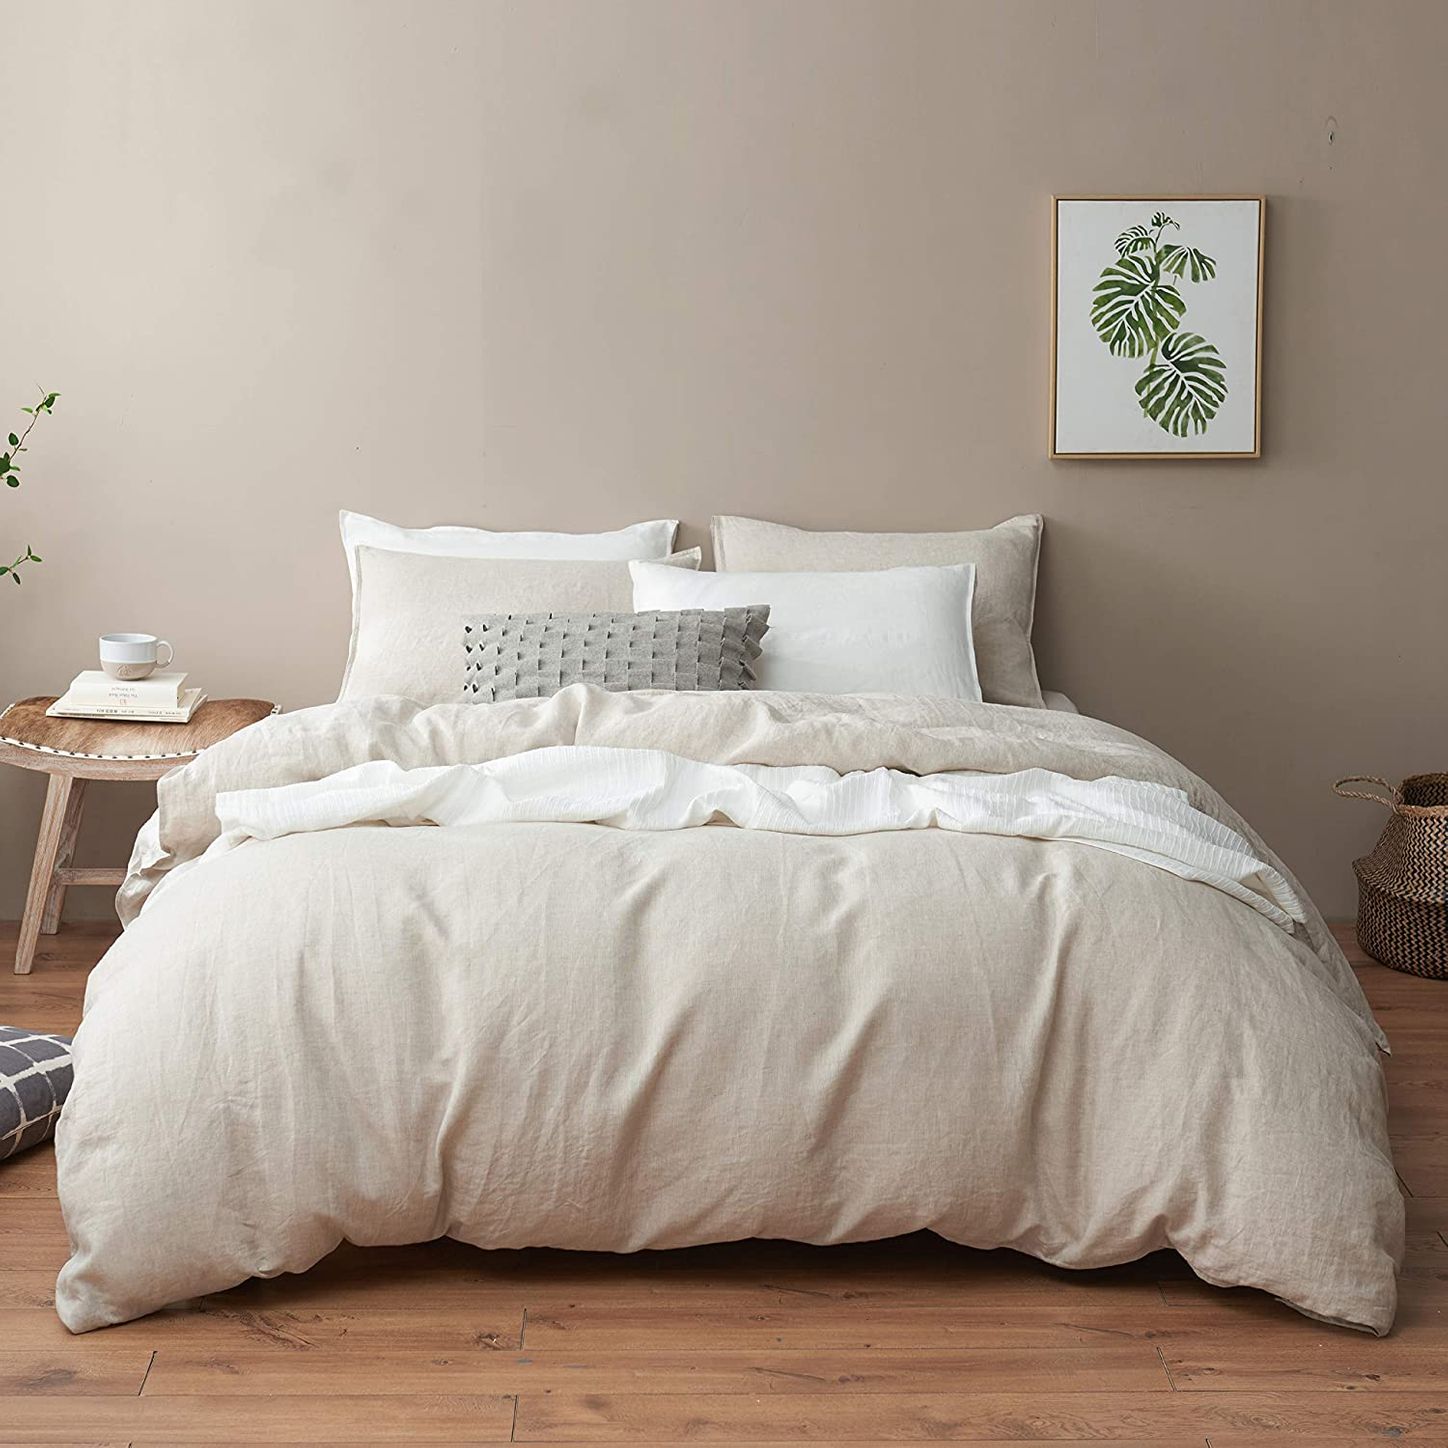 20 Best Duvet Covers 2022 The Strategist, How Do You Put A Duvet Cover In 10 Seconds